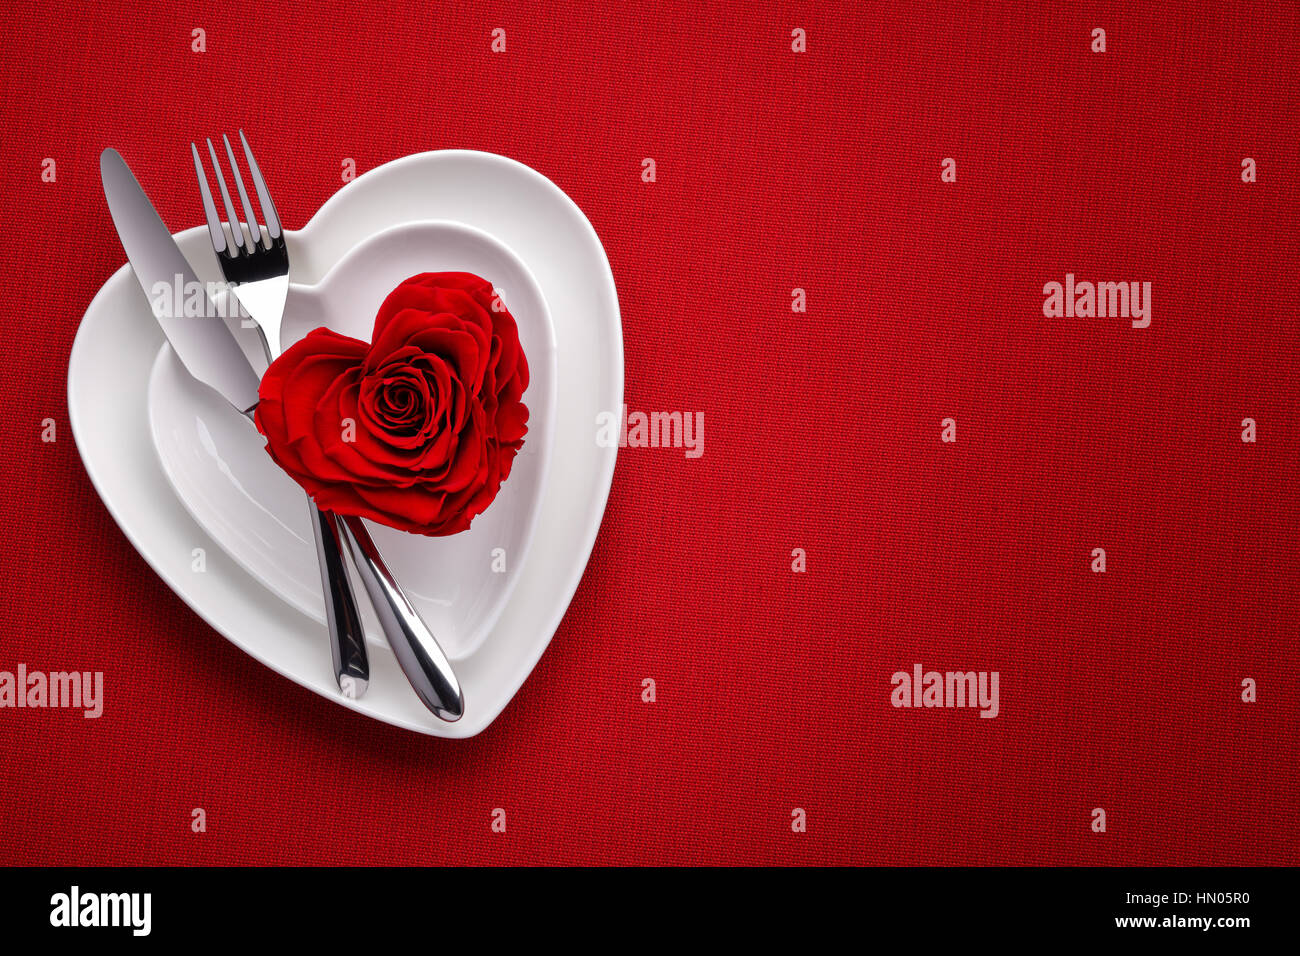 Red rose on white dish.Meal on Valentines Day Stock Photo